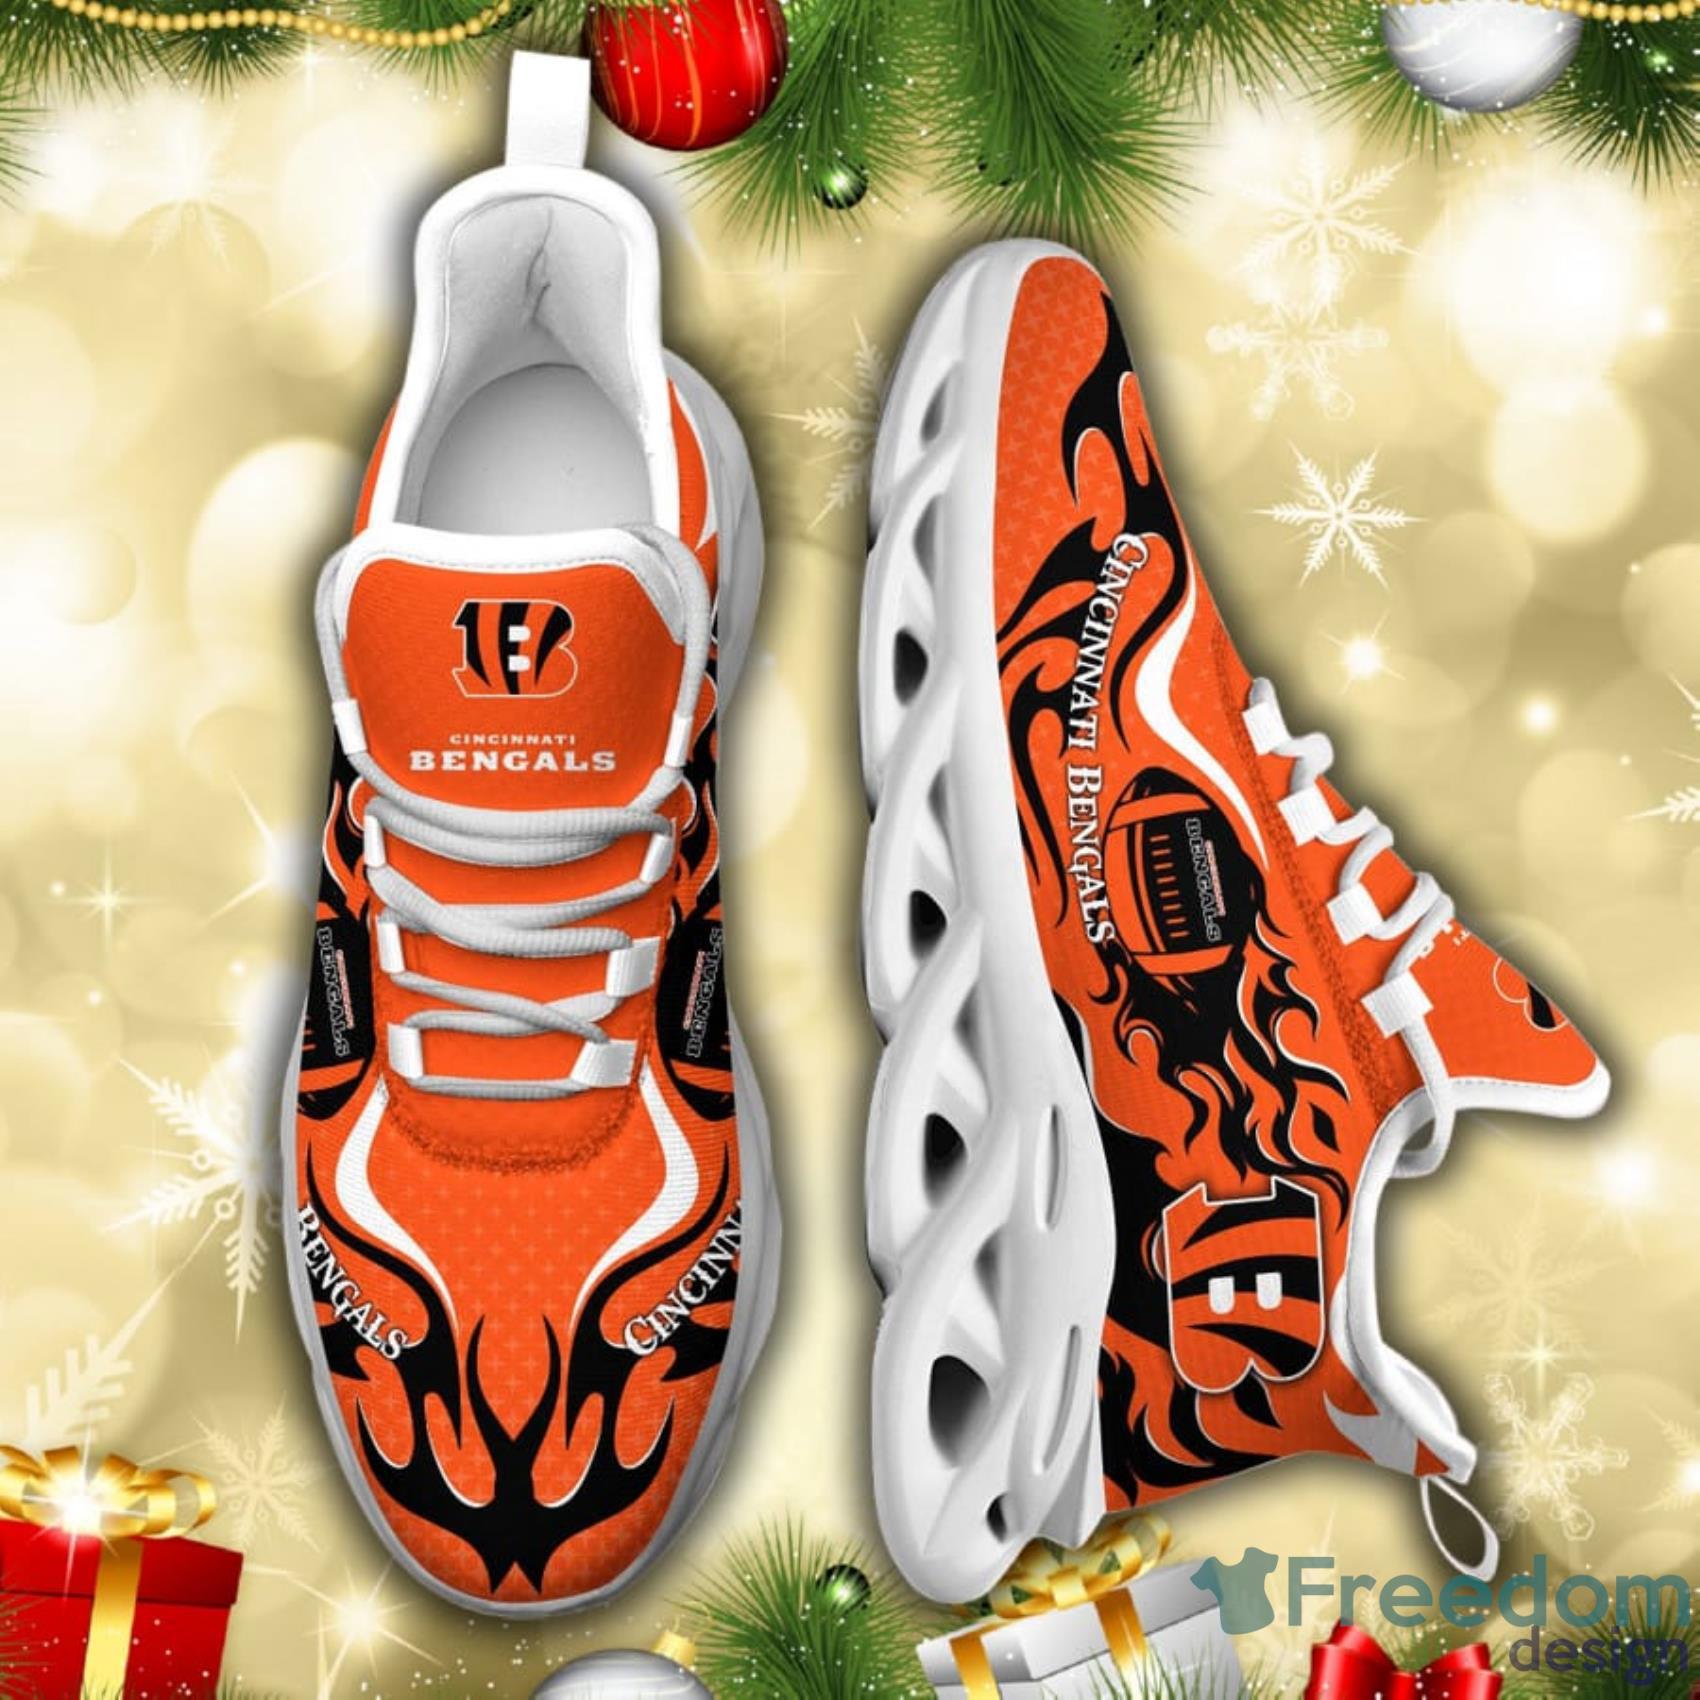 Bengals Holiday Gift Ideas